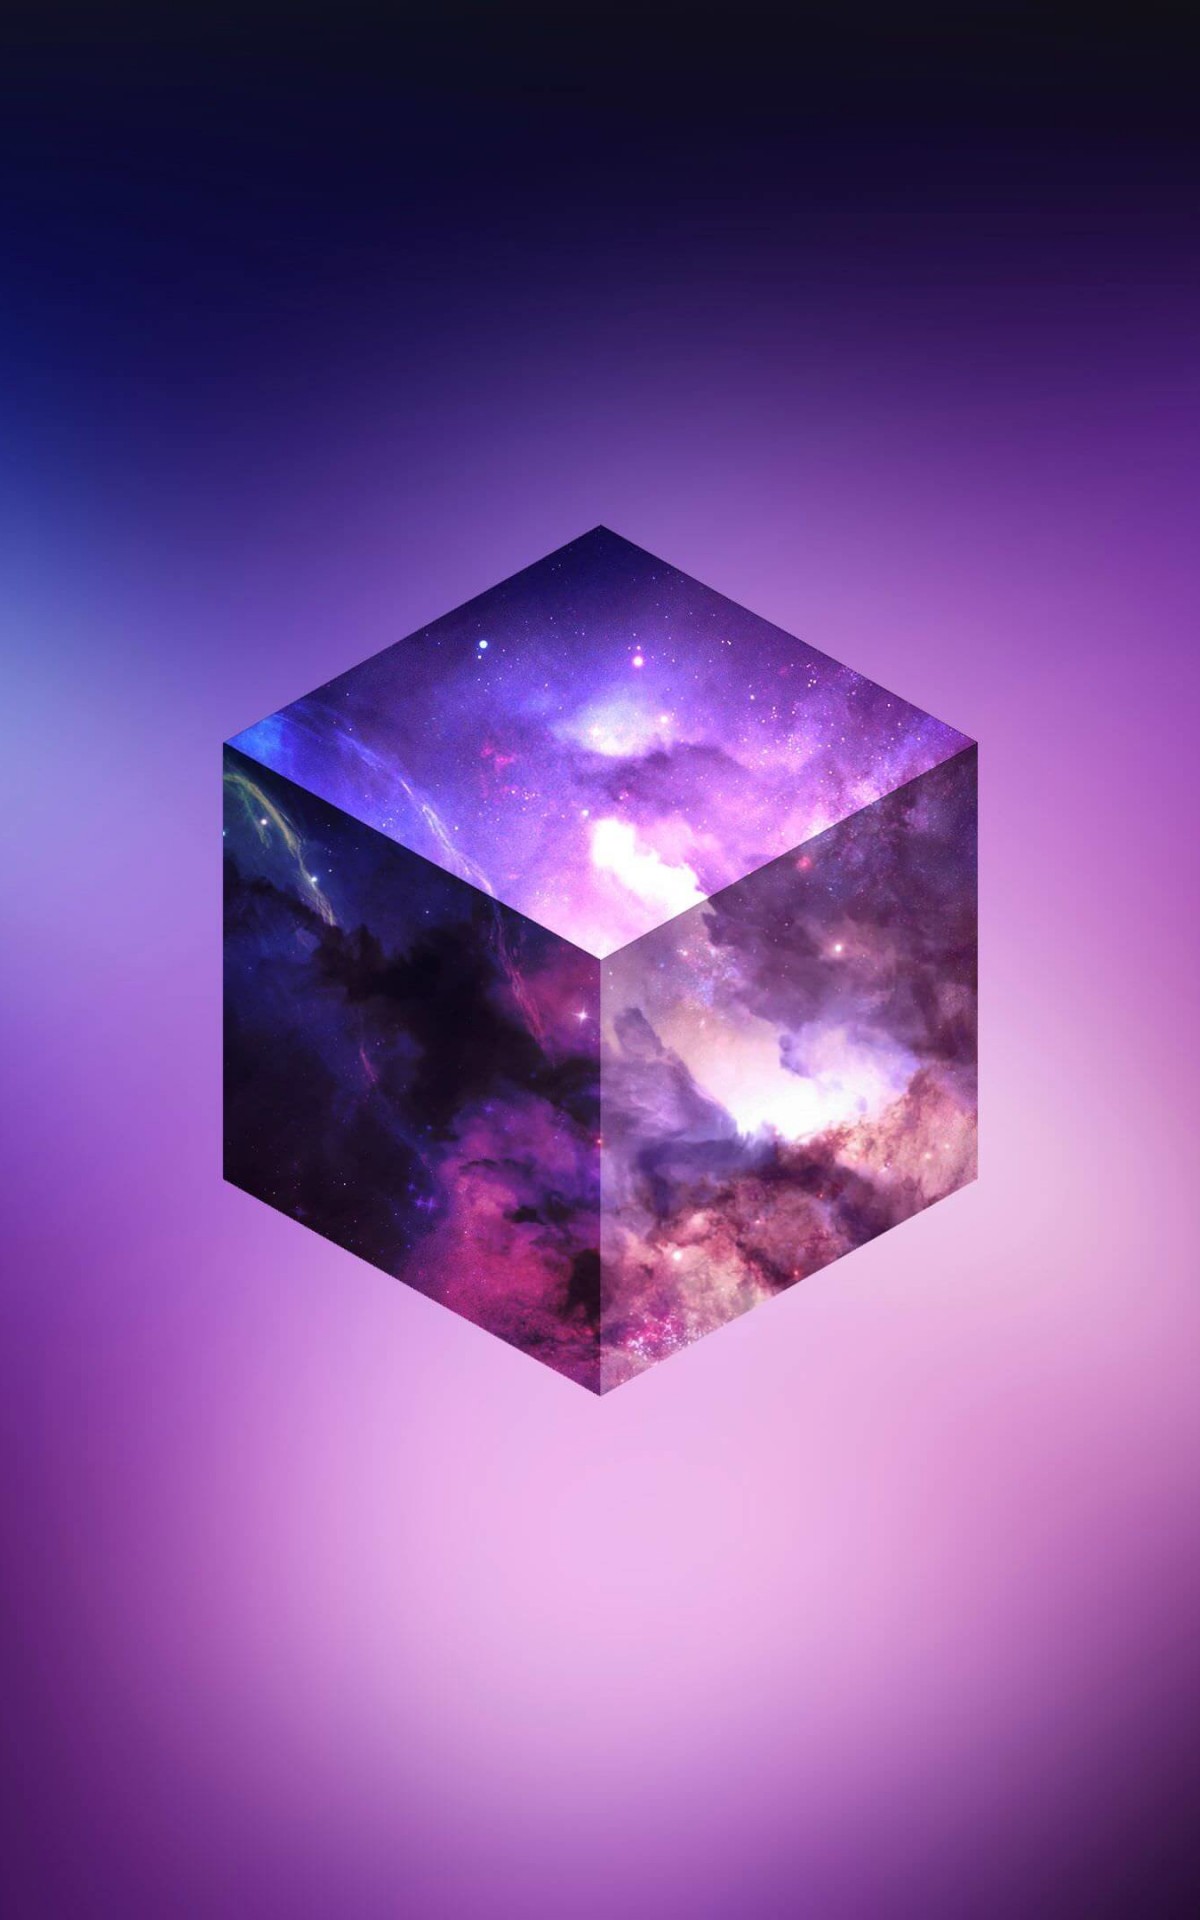 Cosmic Cube Wallpaper for Amazon Kindle Fire HDX